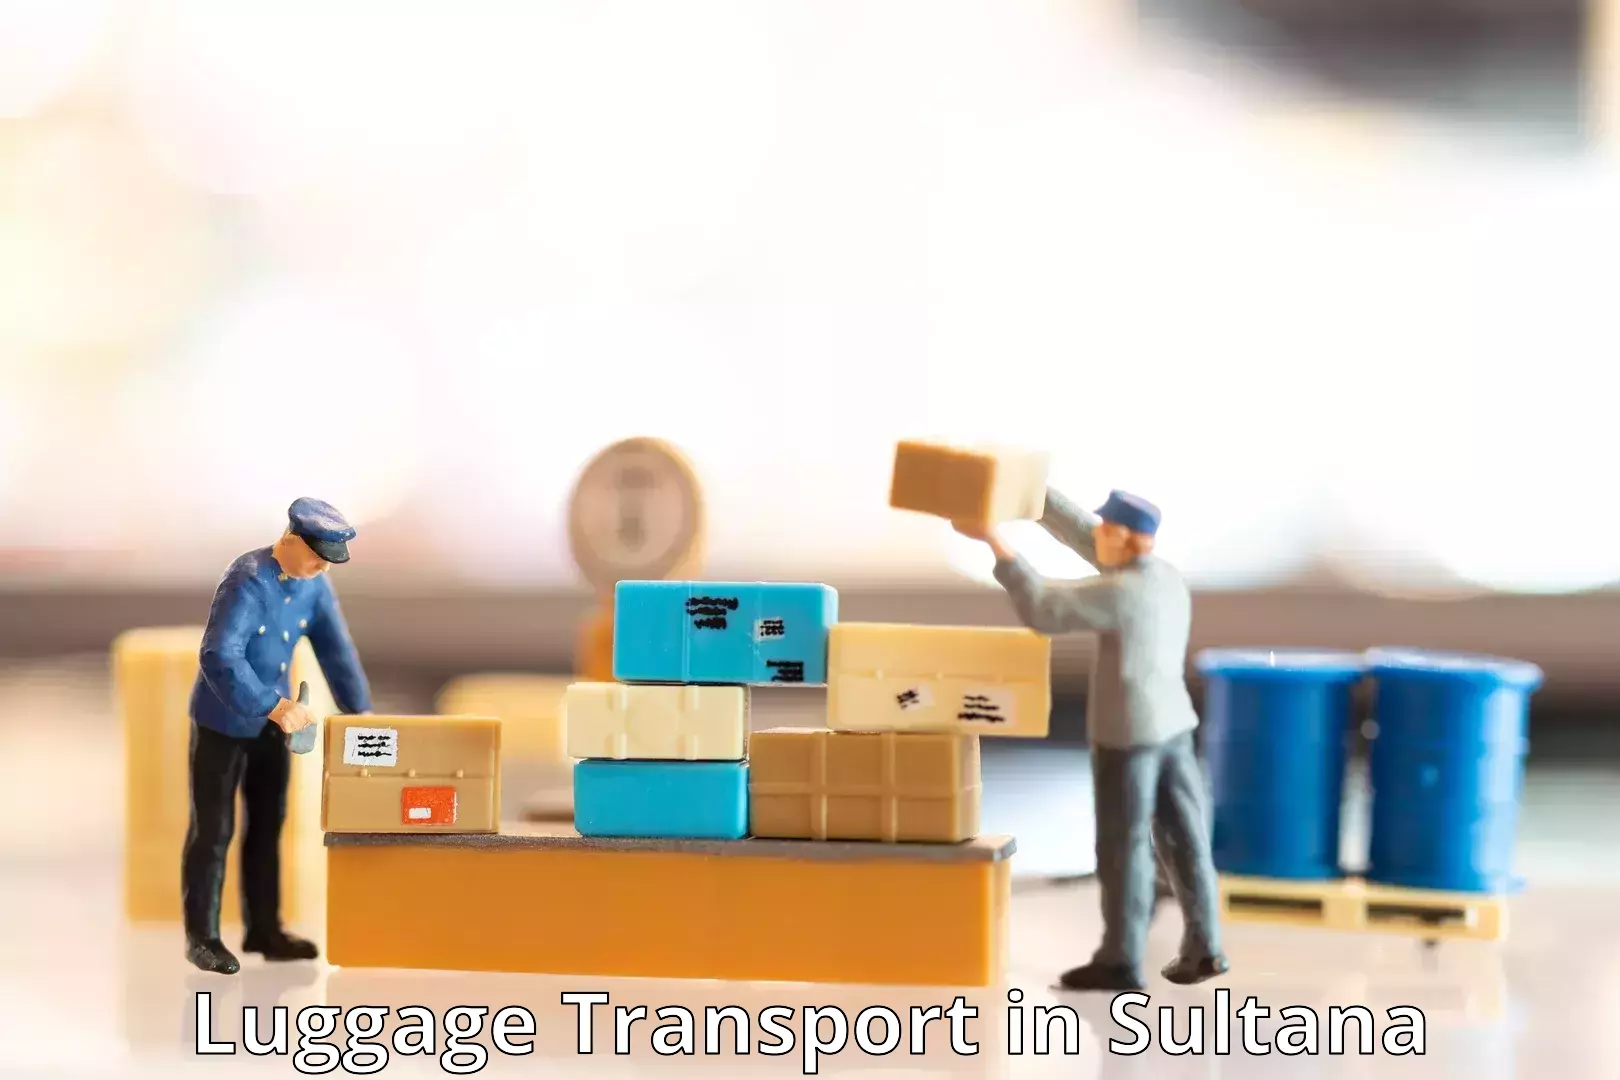 Luggage shipment tracking in Sultana